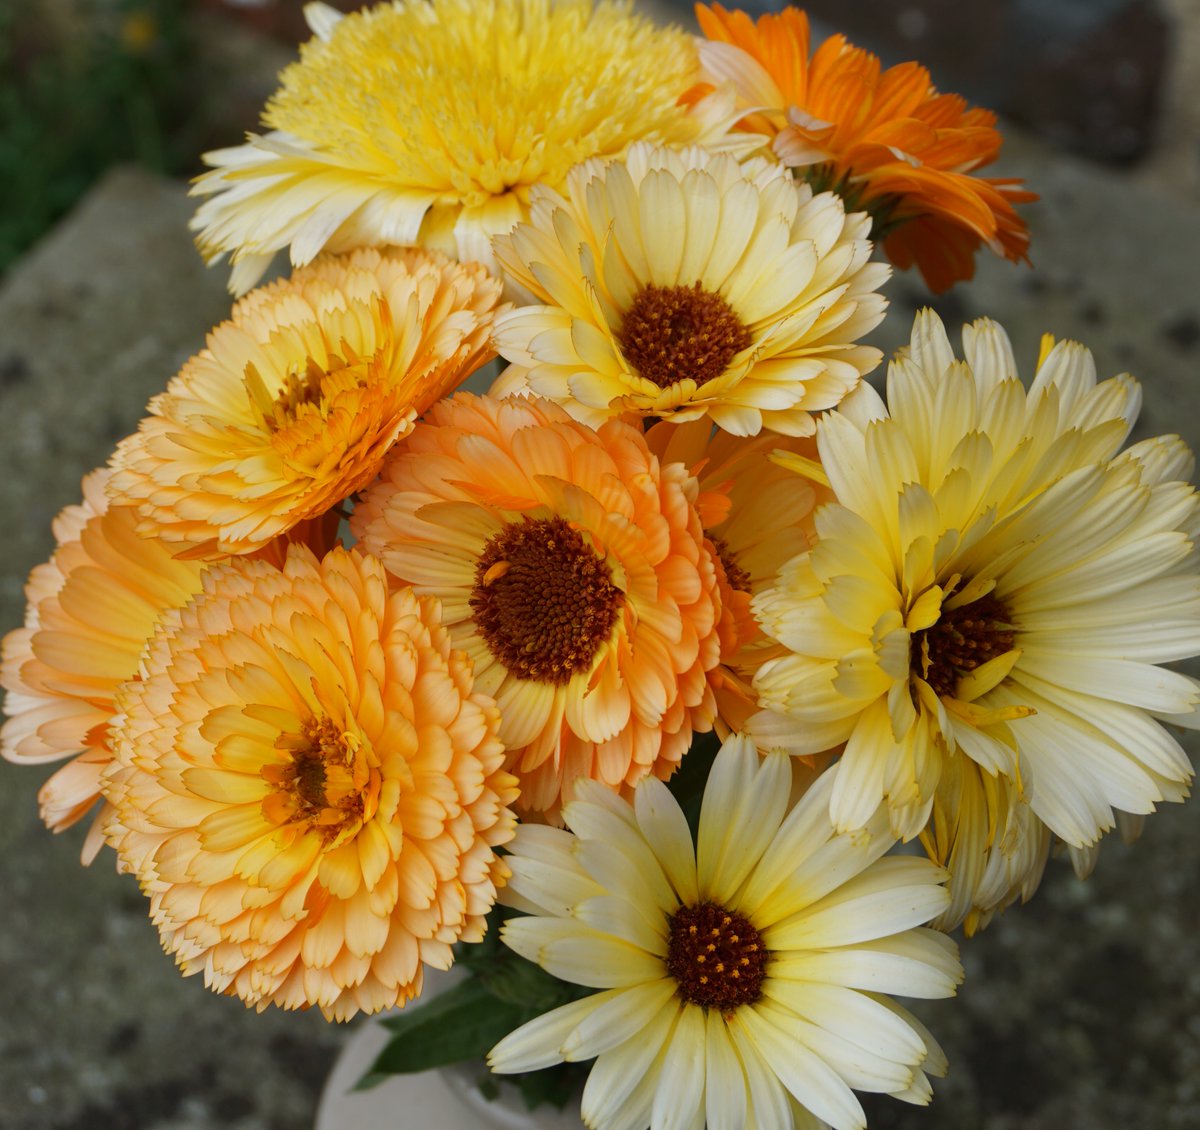 Brightening up your Monday with a bunch of Calendula. 

#cutflowers #calendula #marigold #growyourownflowers